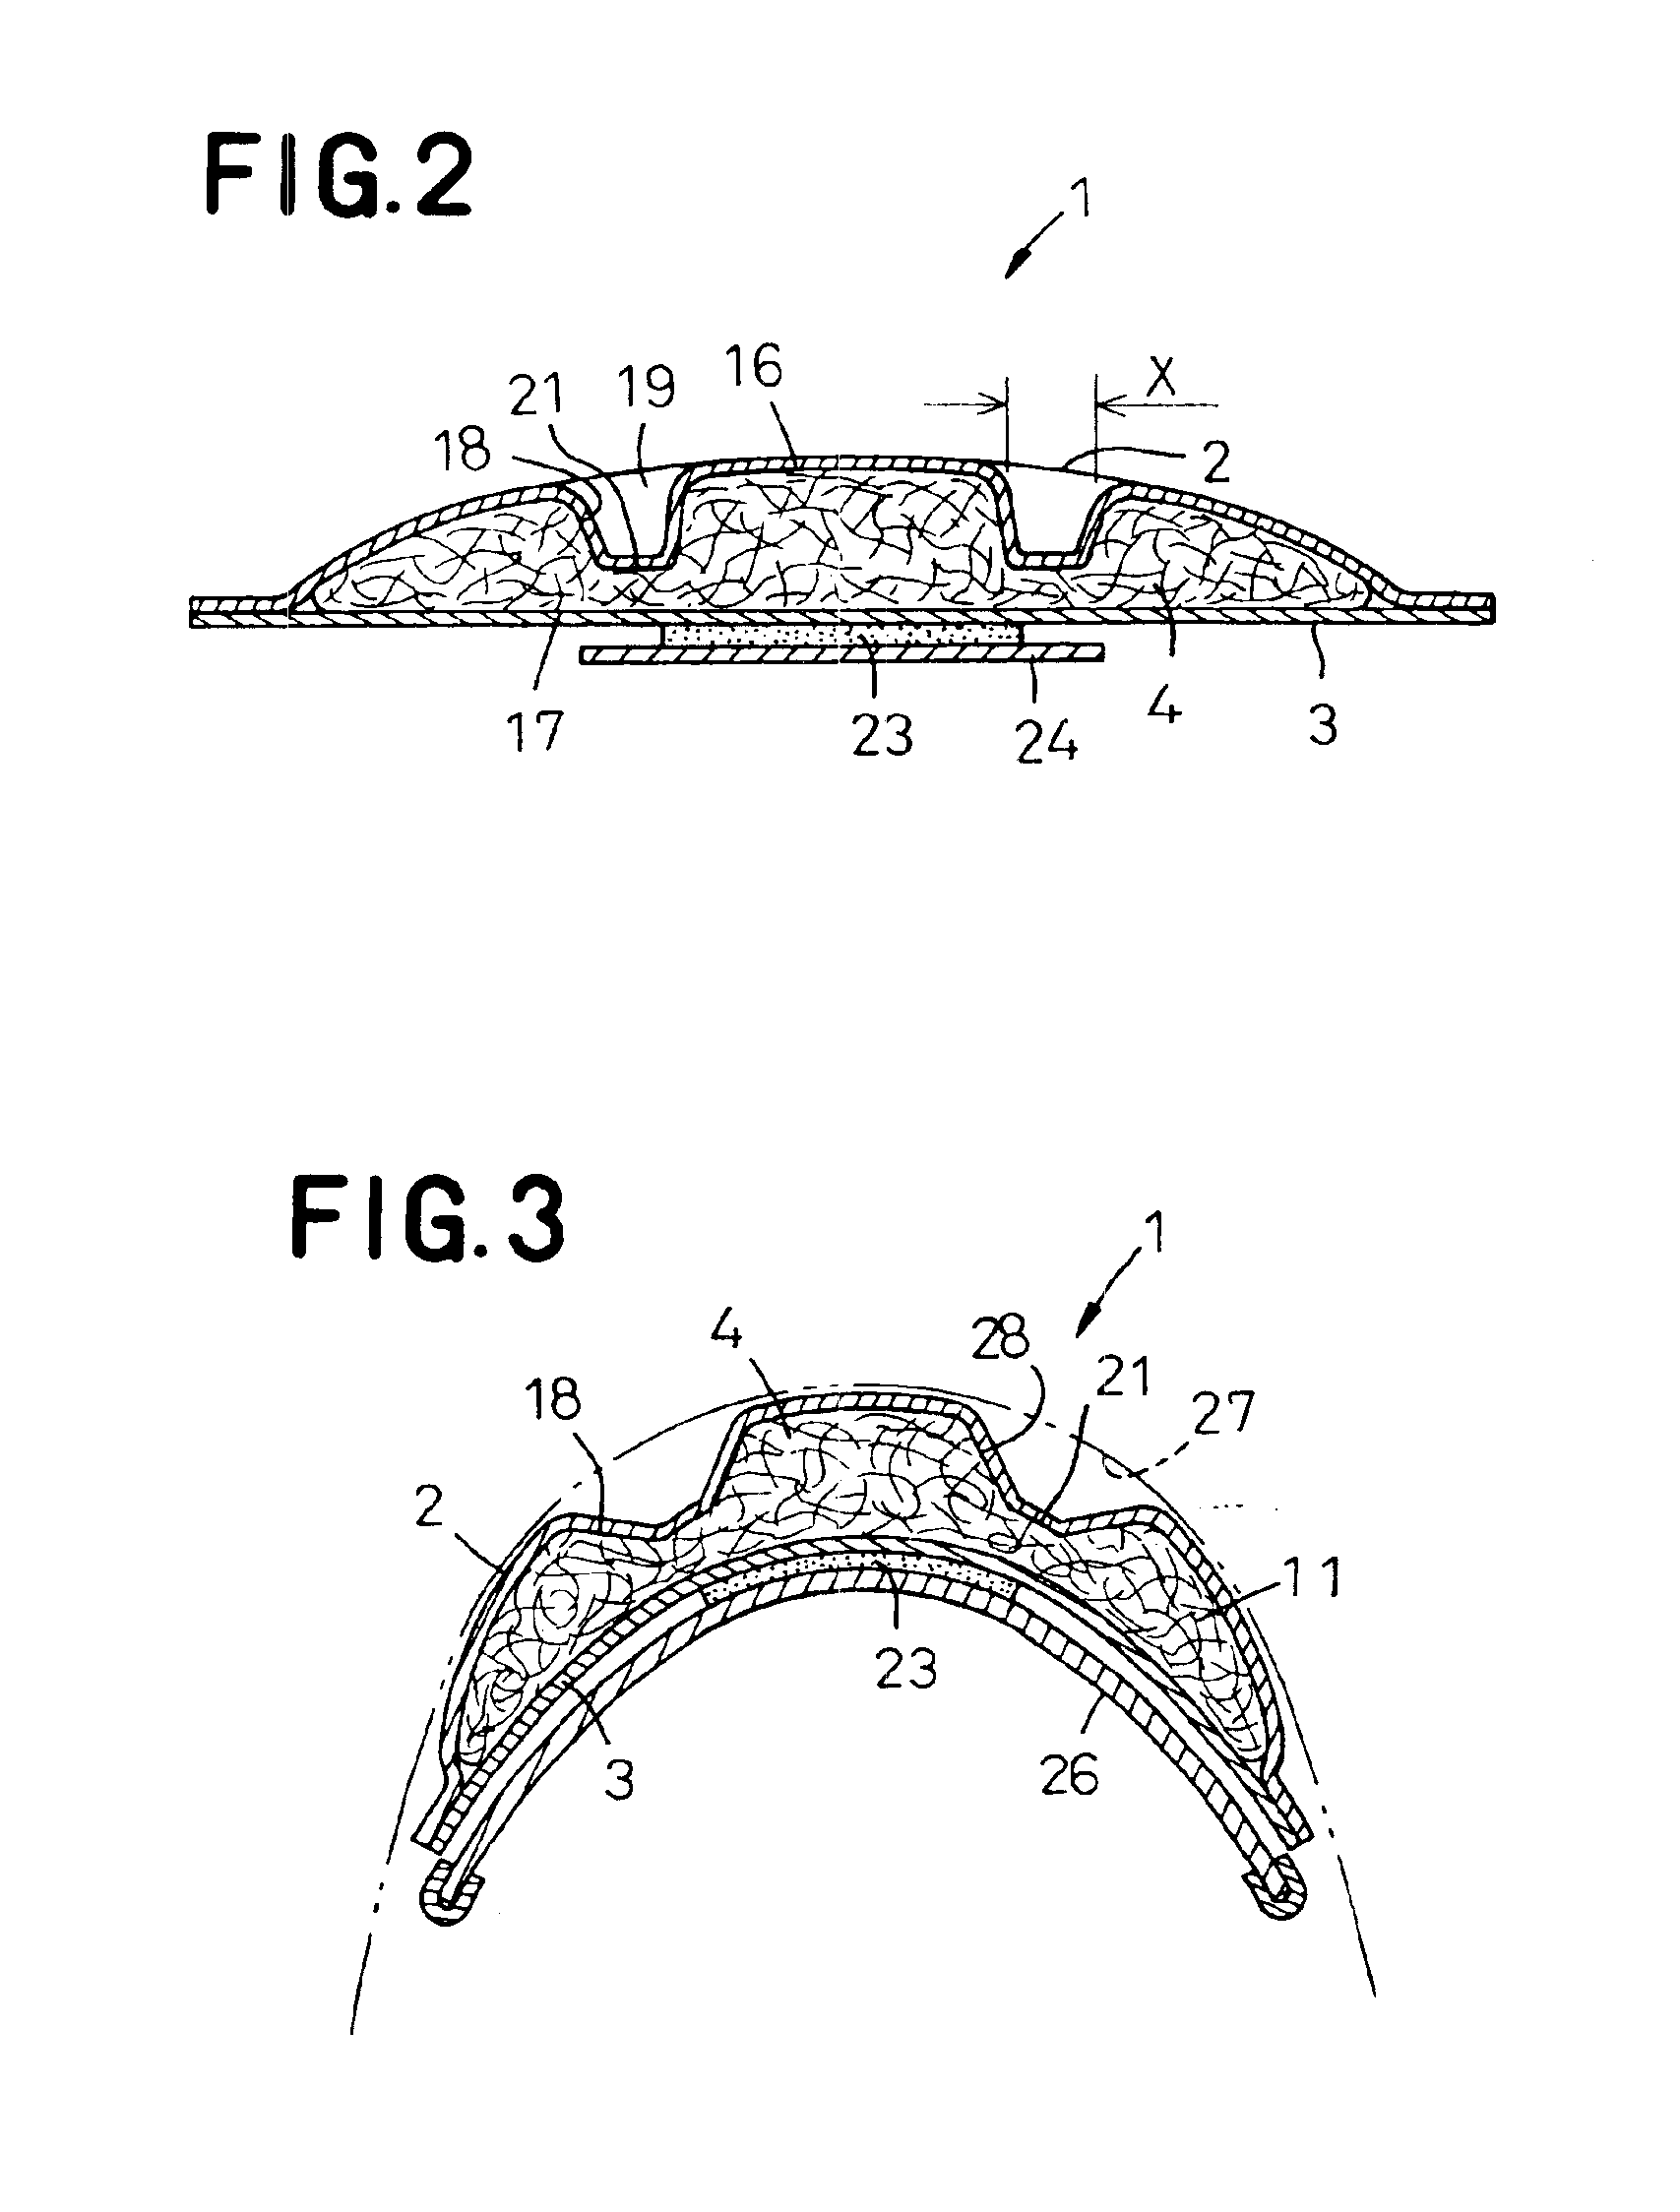 Disposable body fluid absorbent article having longitudinal side groove